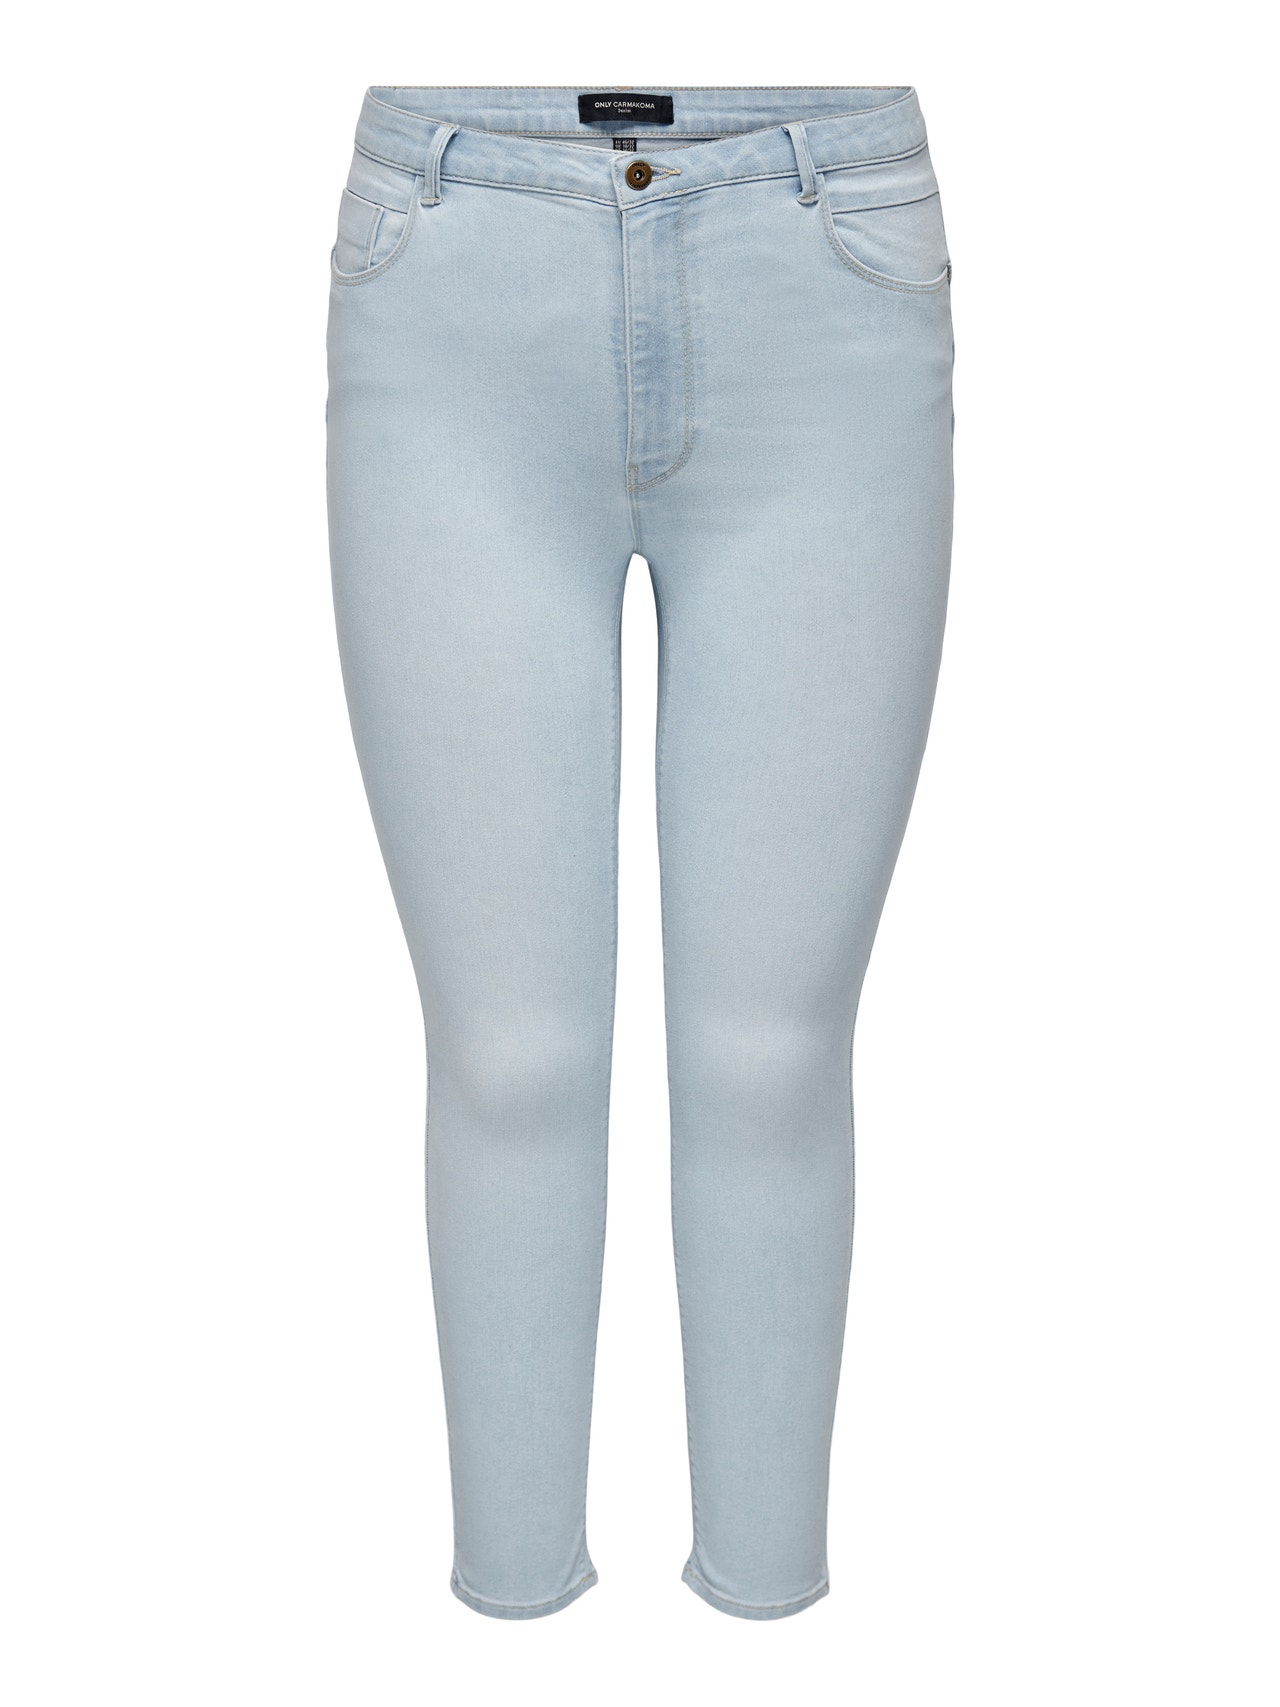 ONLY Jeans Skinny Fit Taille moyenne -Light Blue Denim - 15251372